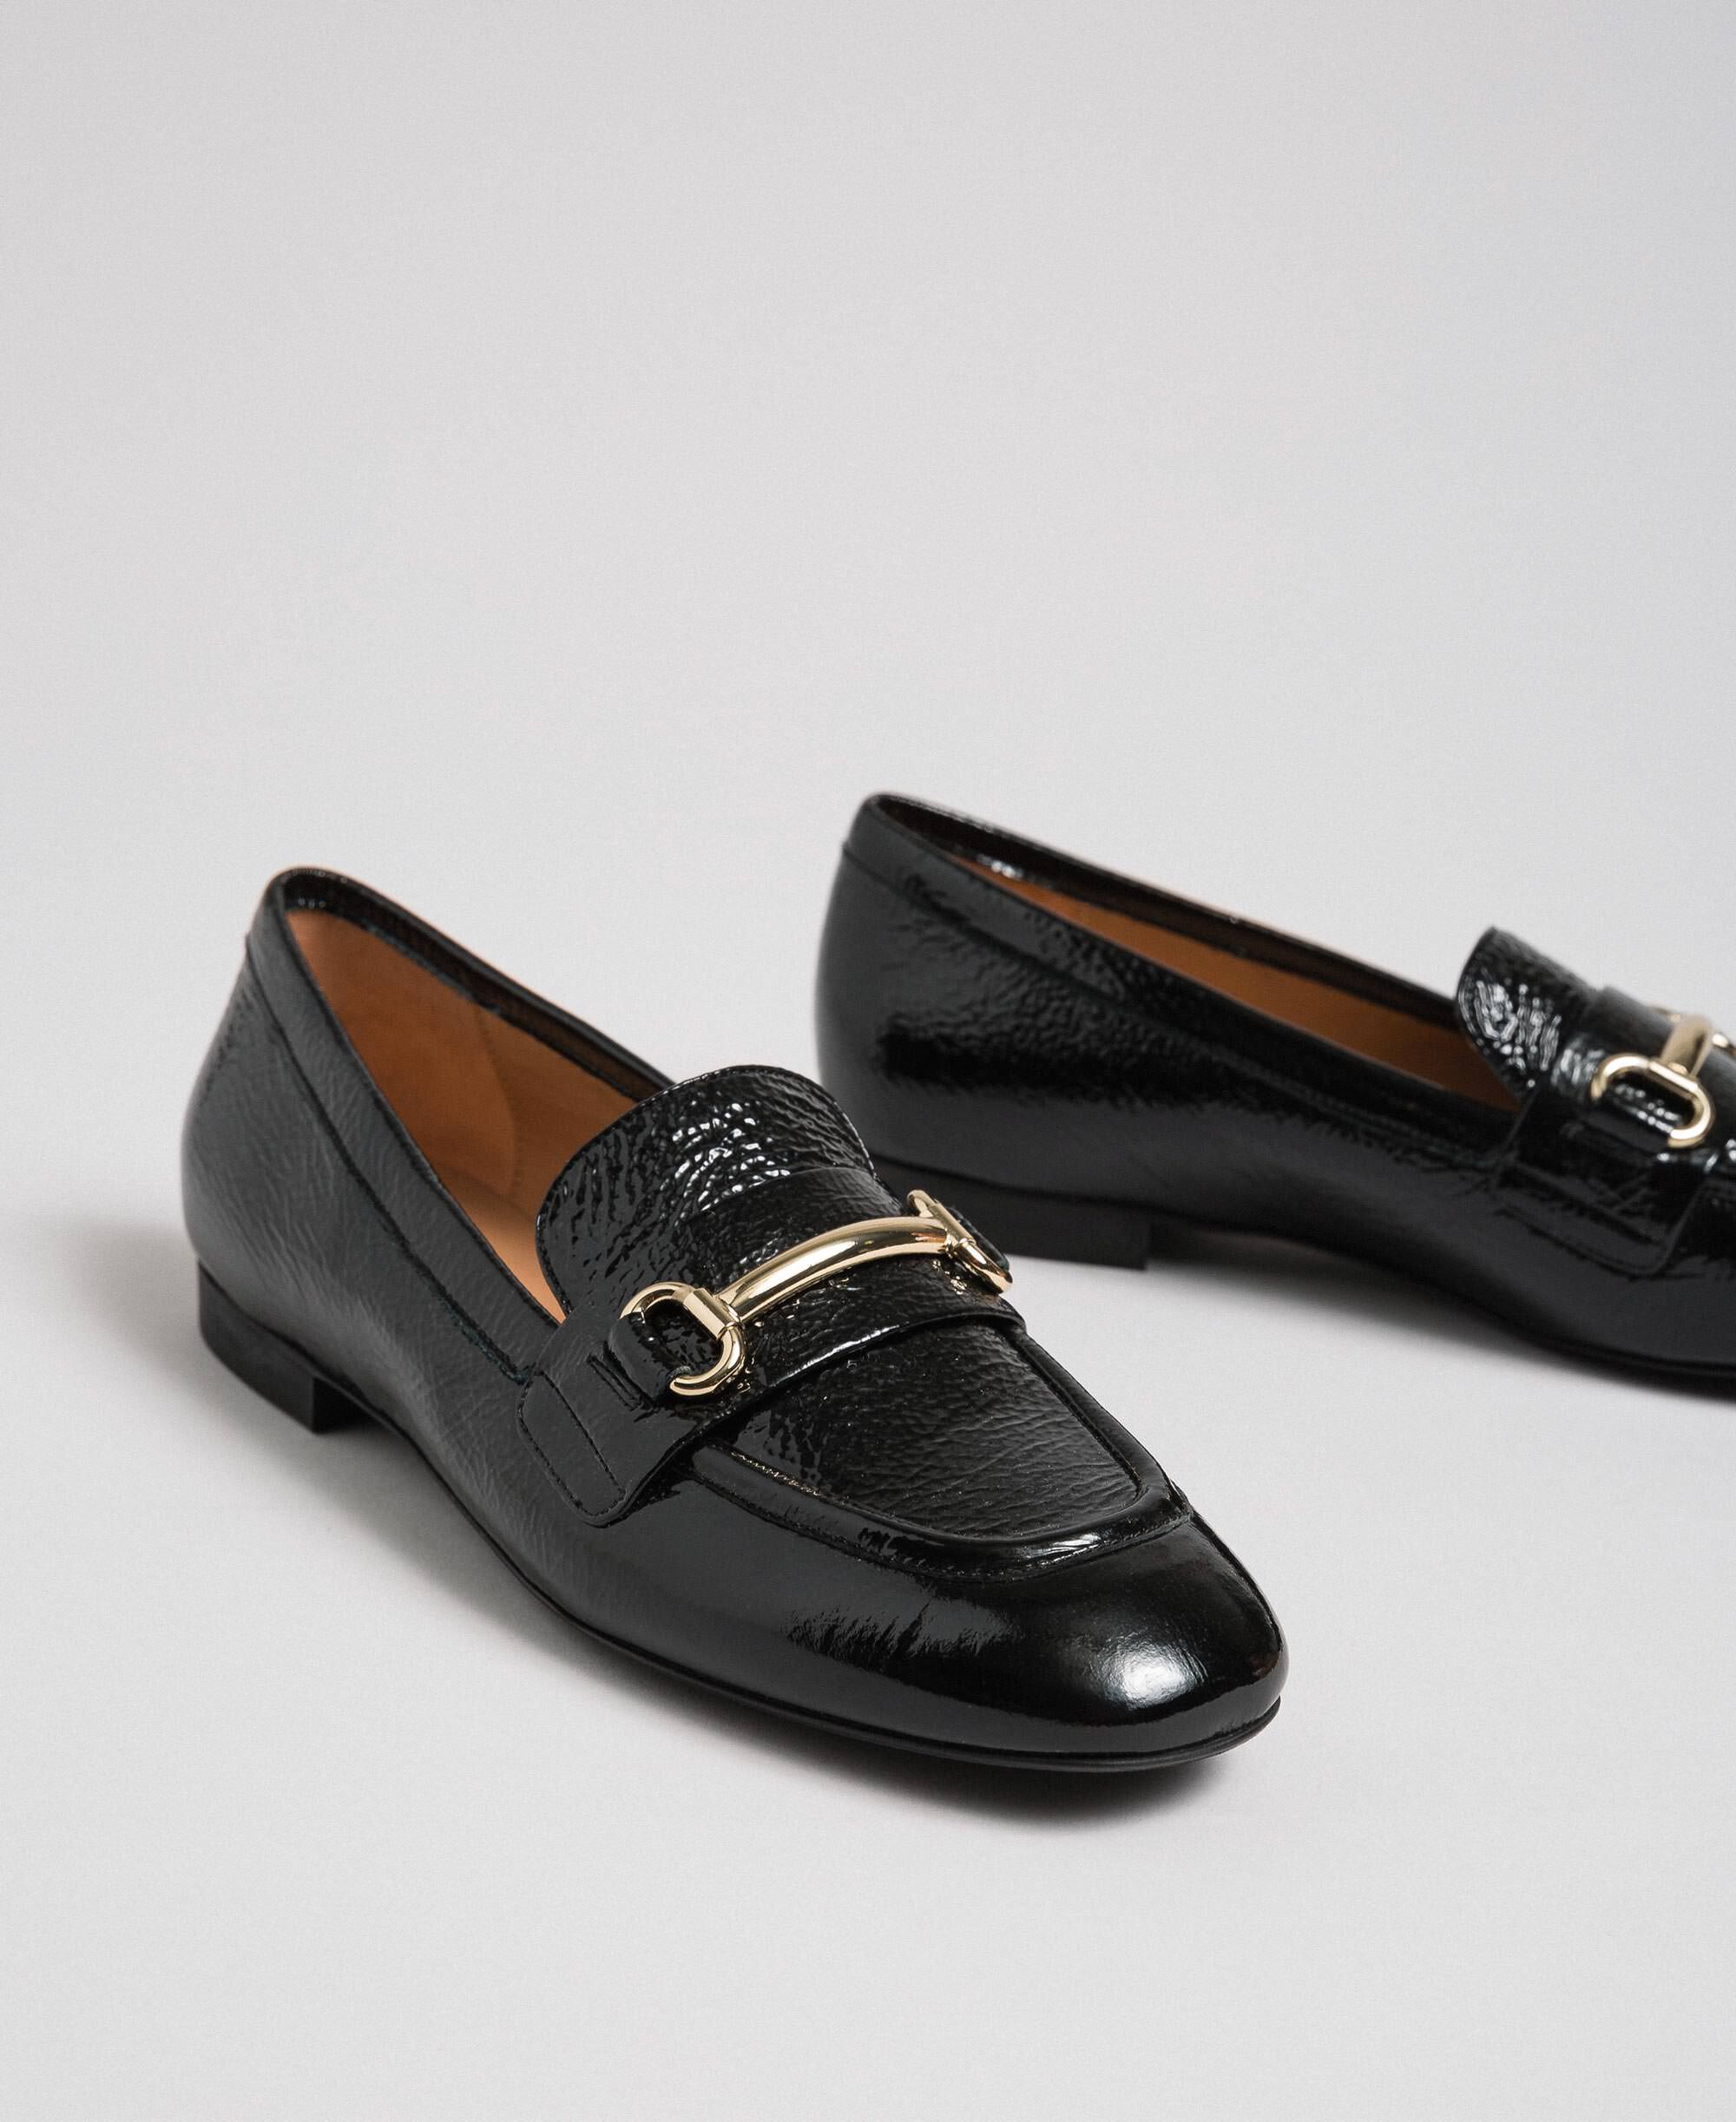 Patent leather moccasins